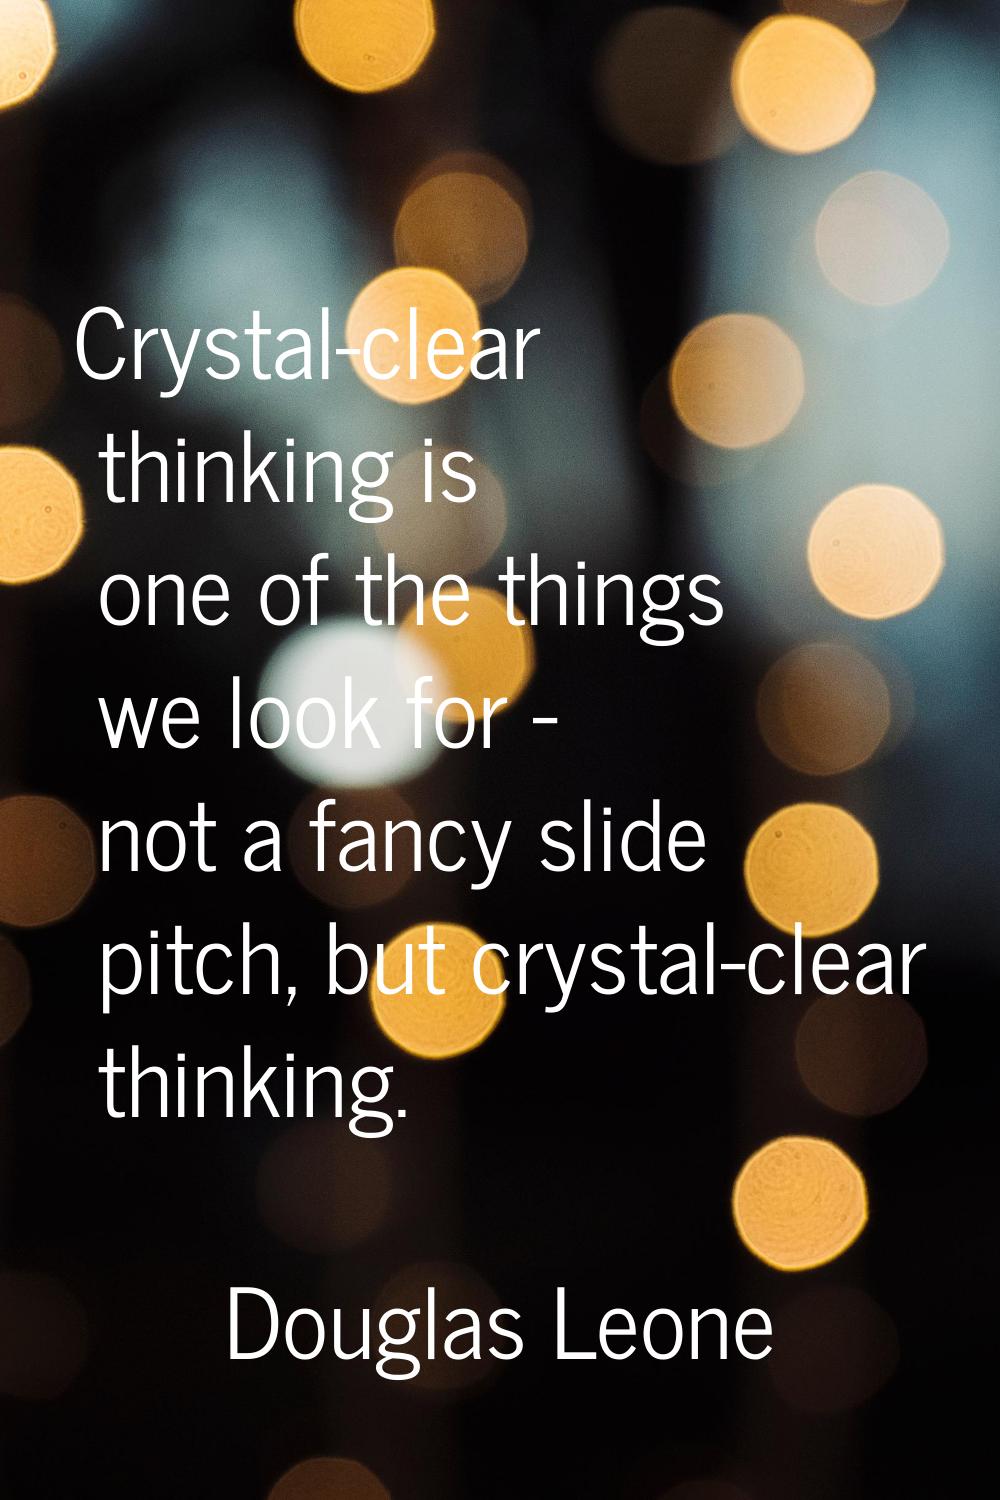 Crystal-clear thinking is one of the things we look for - not a fancy slide pitch, but crystal-clea